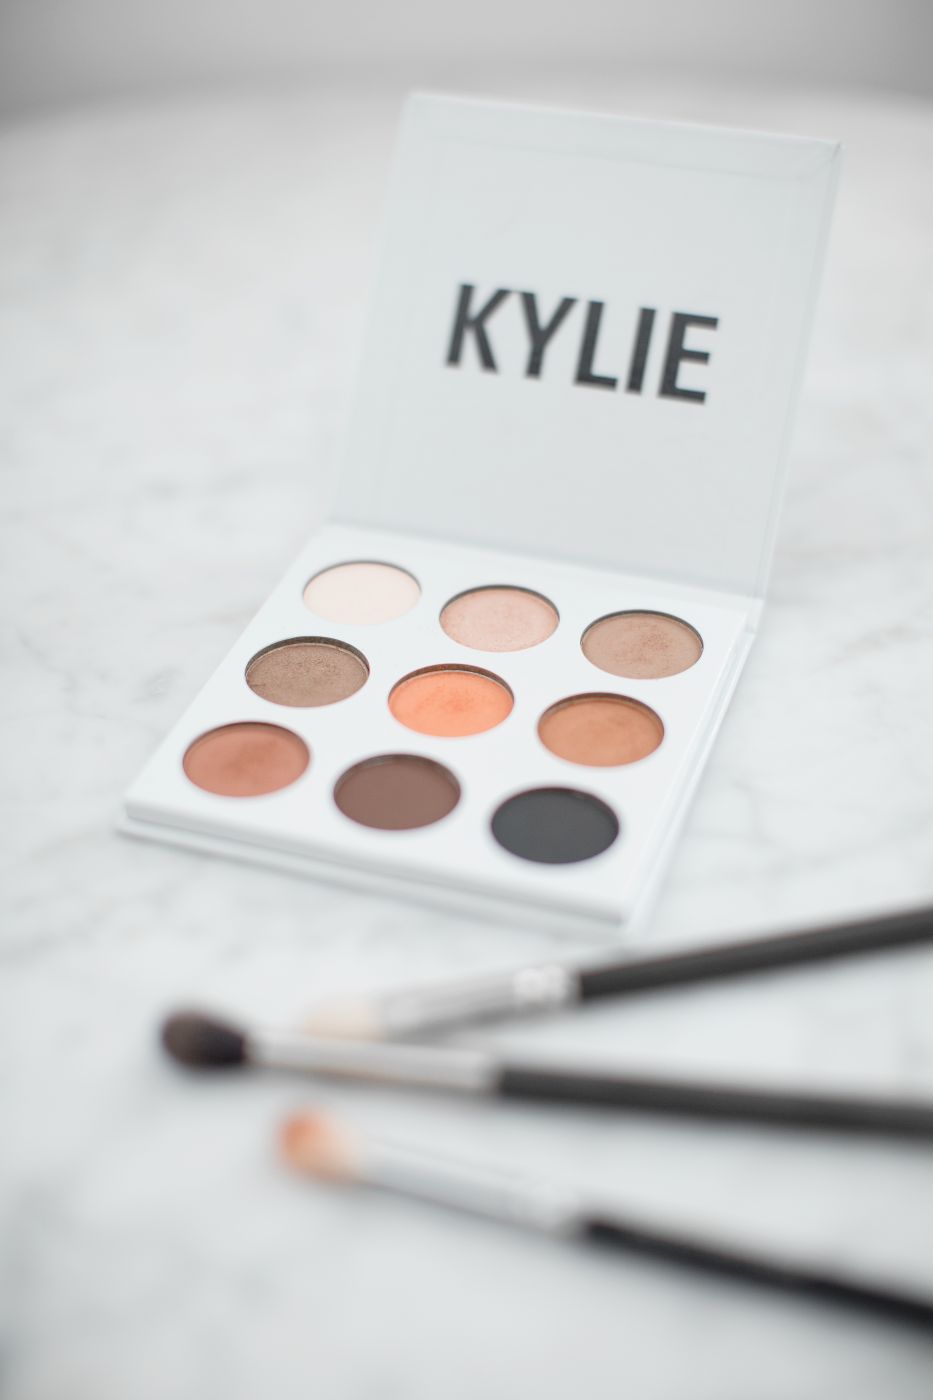 lily-pebbles-kylie-cosmetics-eye-shadow-palette-october-2016-3